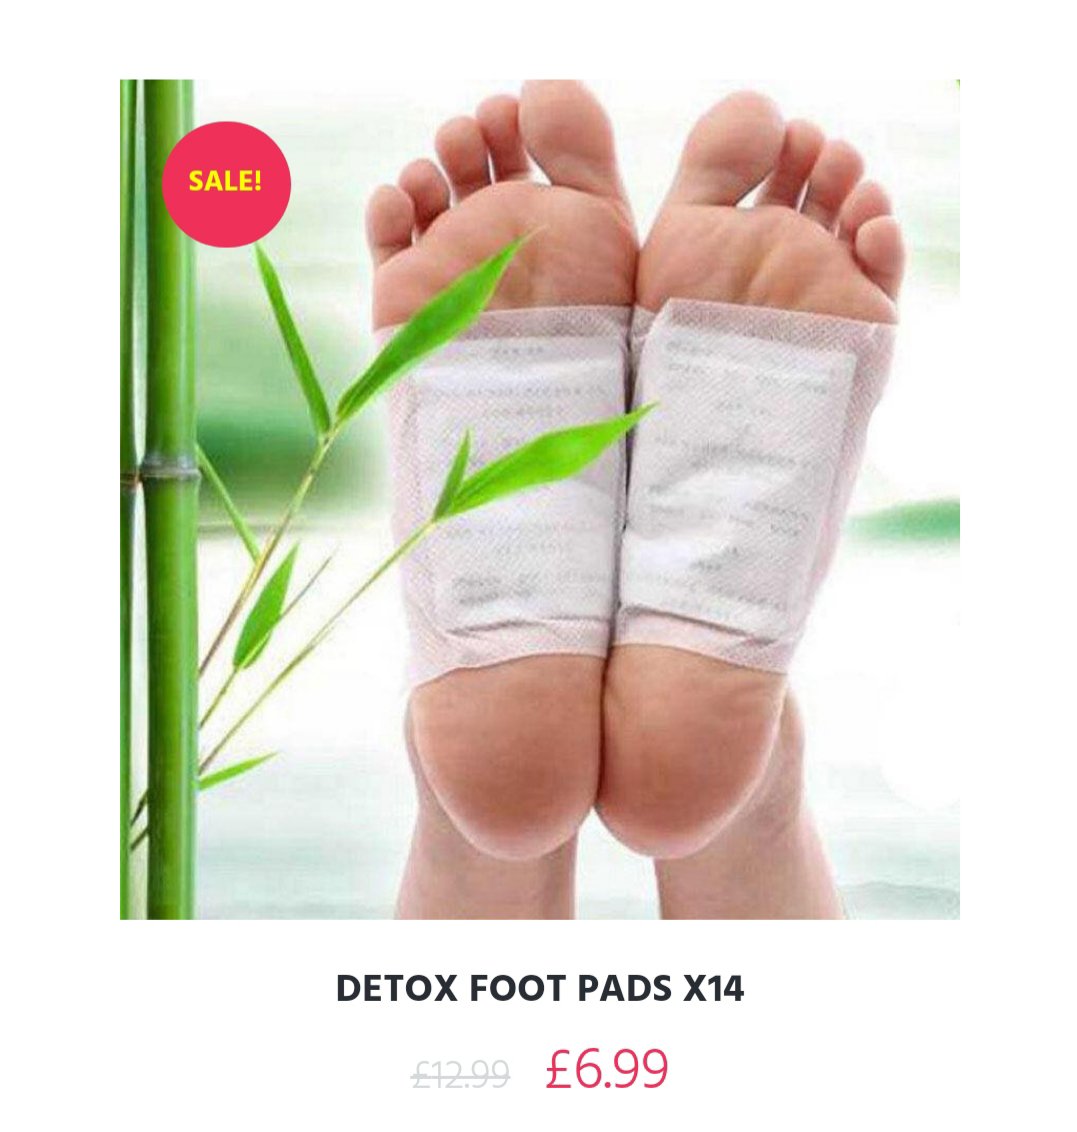 Natural Beauty Slimming now do DETOX FOOT PADS 😍 £6.99 for 14!! Inbox me for more info.
#detox #detoxfootpads #health #wellbeing #removestoxins #natural #naturalbeautyslimming